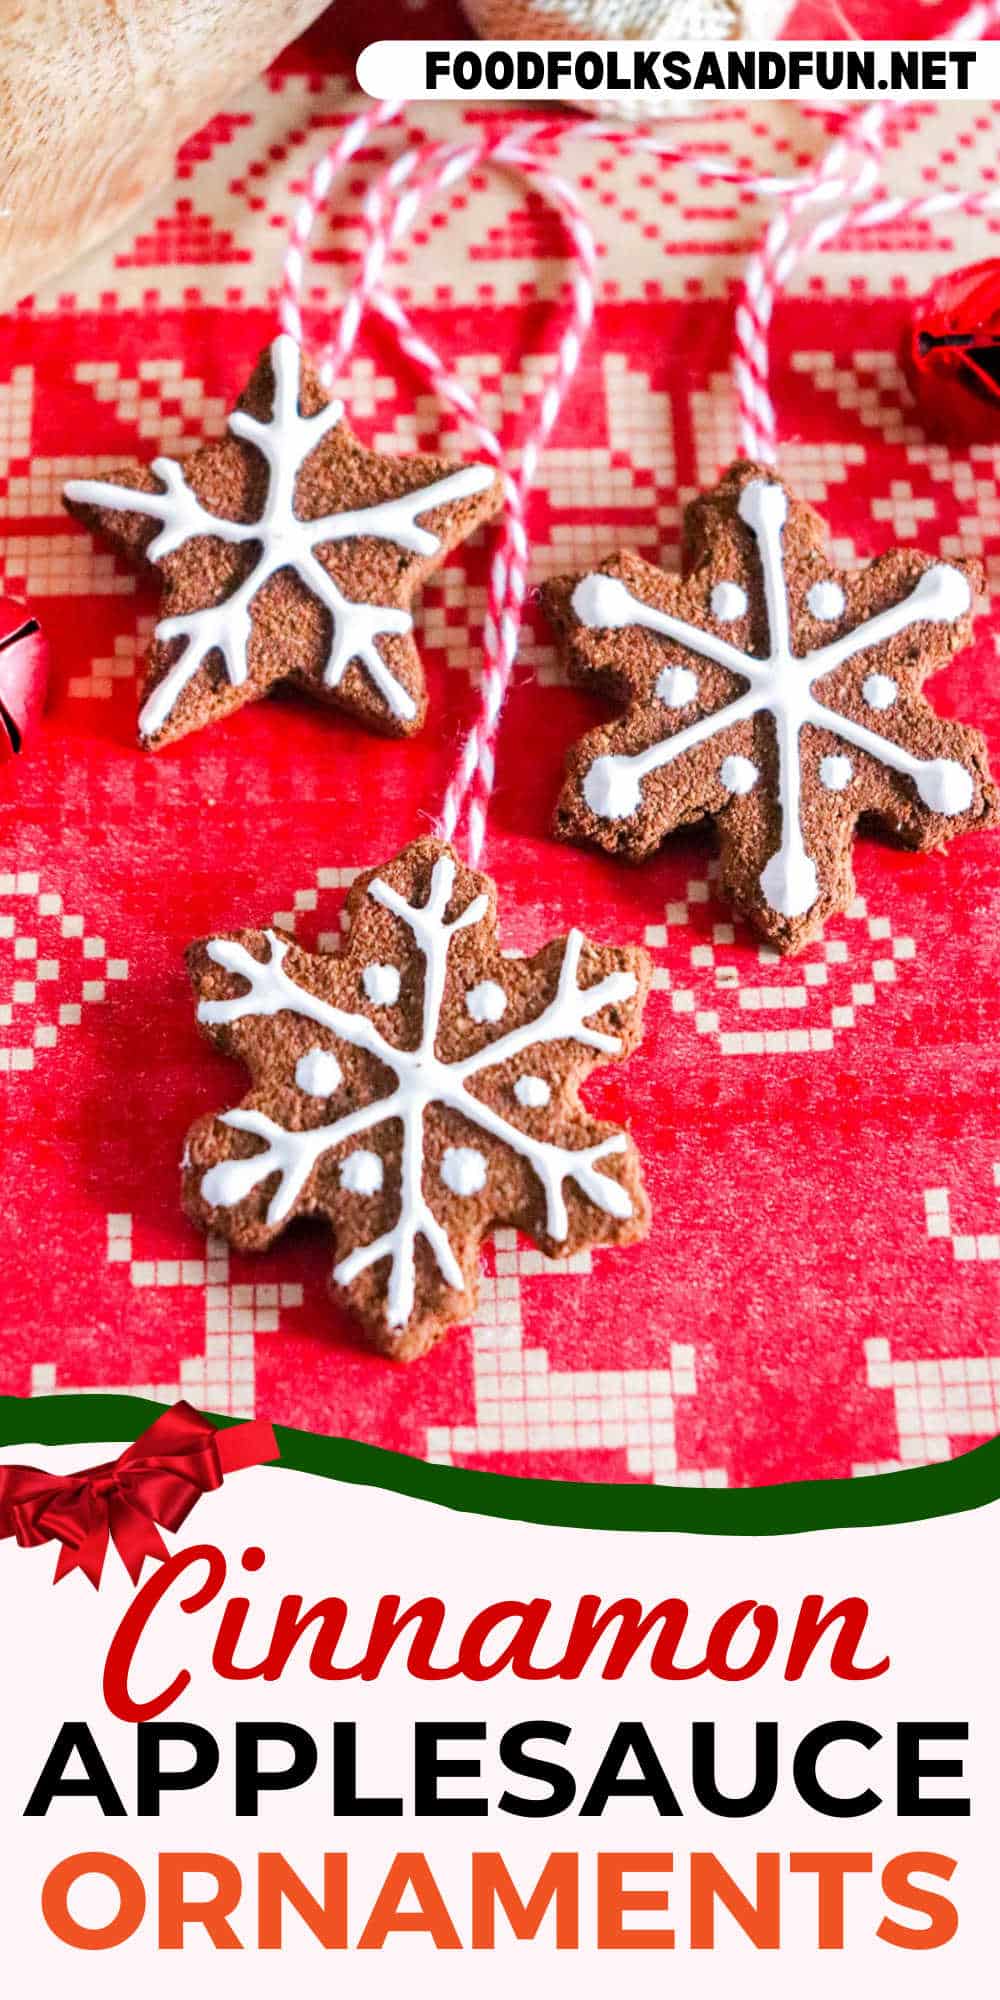 These Cinnamon Applesauce Ornaments are a fun and festive craft for decorating with and attaching to presents. Grab the kids because they’ll love making these with you! via @foodfolksandfun